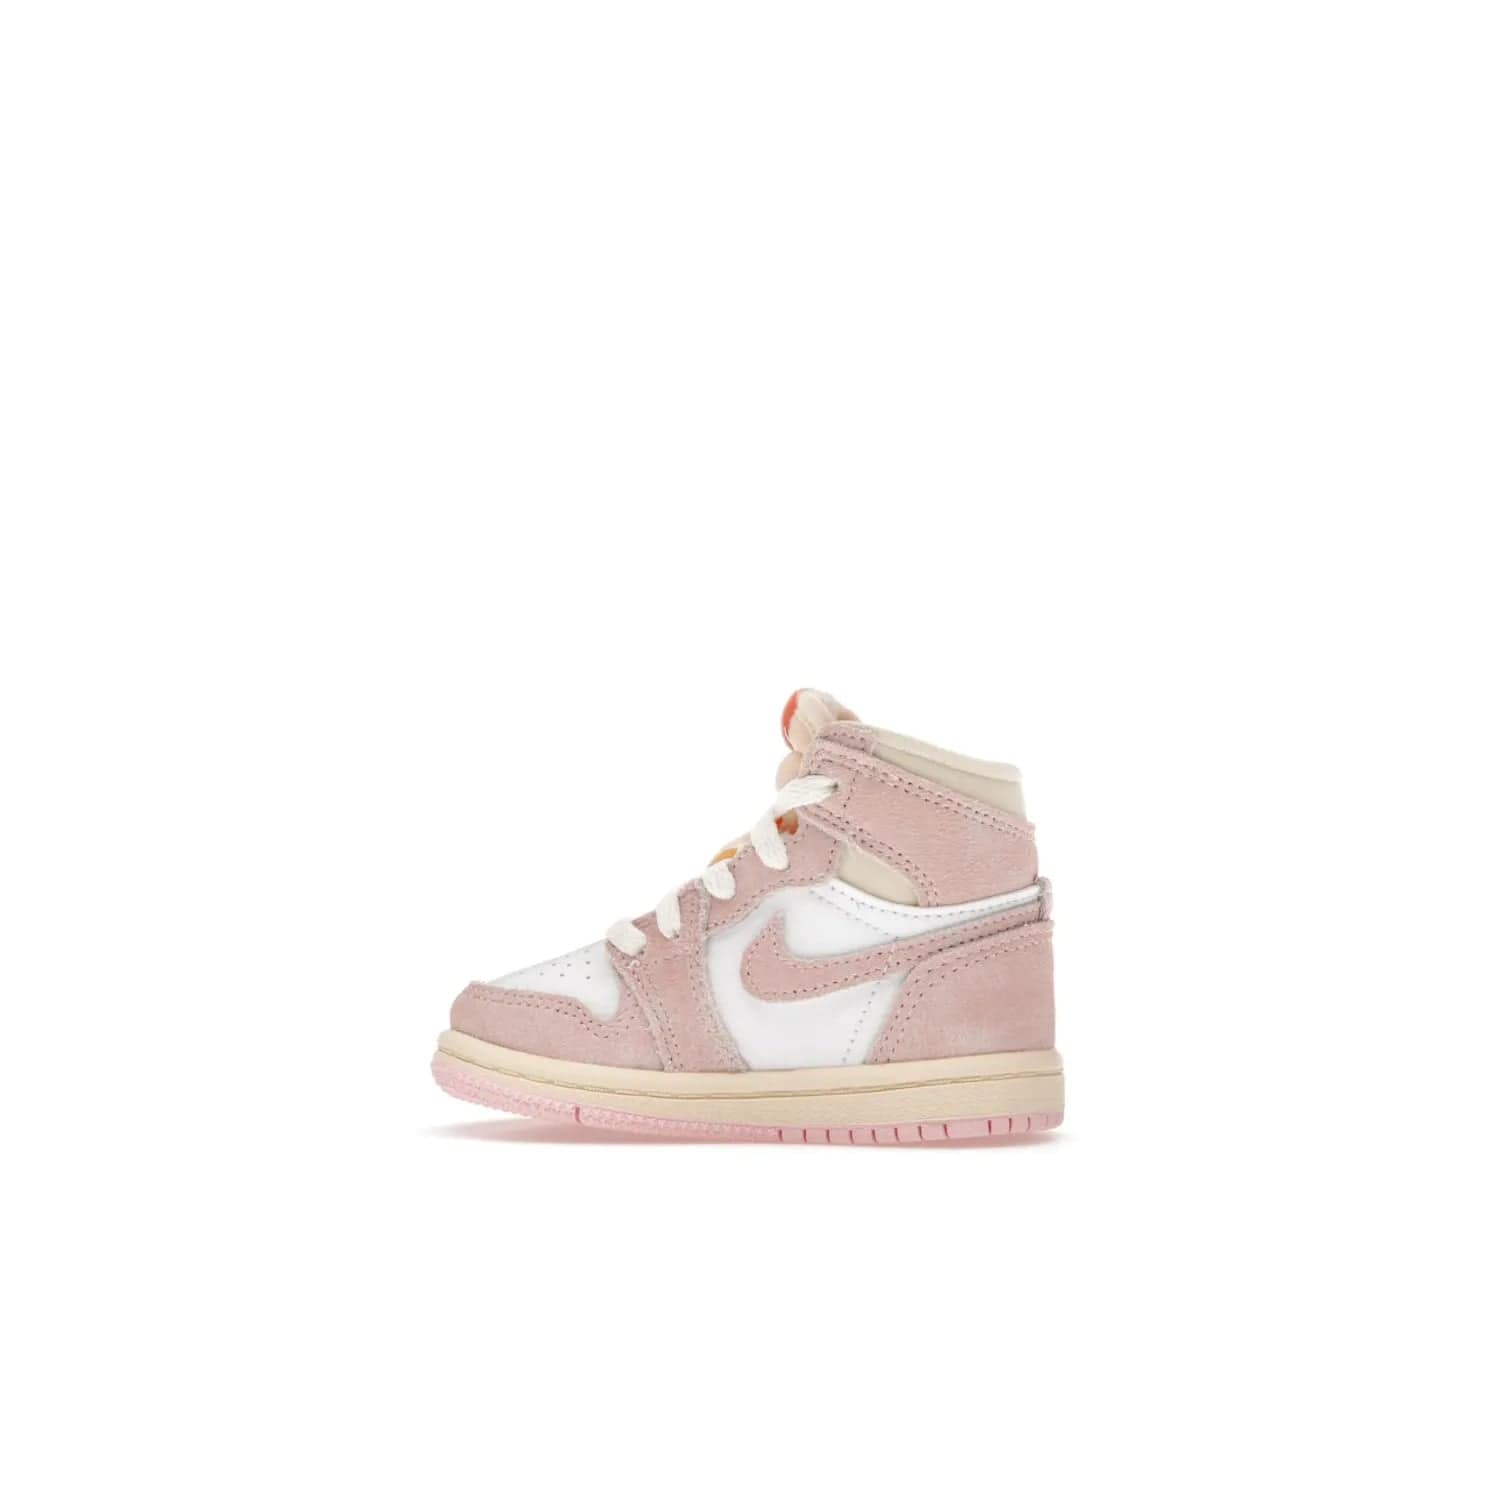 Jordan 1 Retro High OG Washed Pink (TD) - Image 20 - Only at www.BallersClubKickz.com - Retro style meets modern comfort: Introducing the Jordan 1 High OG Washed Pink (TD). Combining Atmosphere/White/Muslin/Sail colors with a high-rise silhouette, these shoes will be an instant classic when they release April 22, 2023.